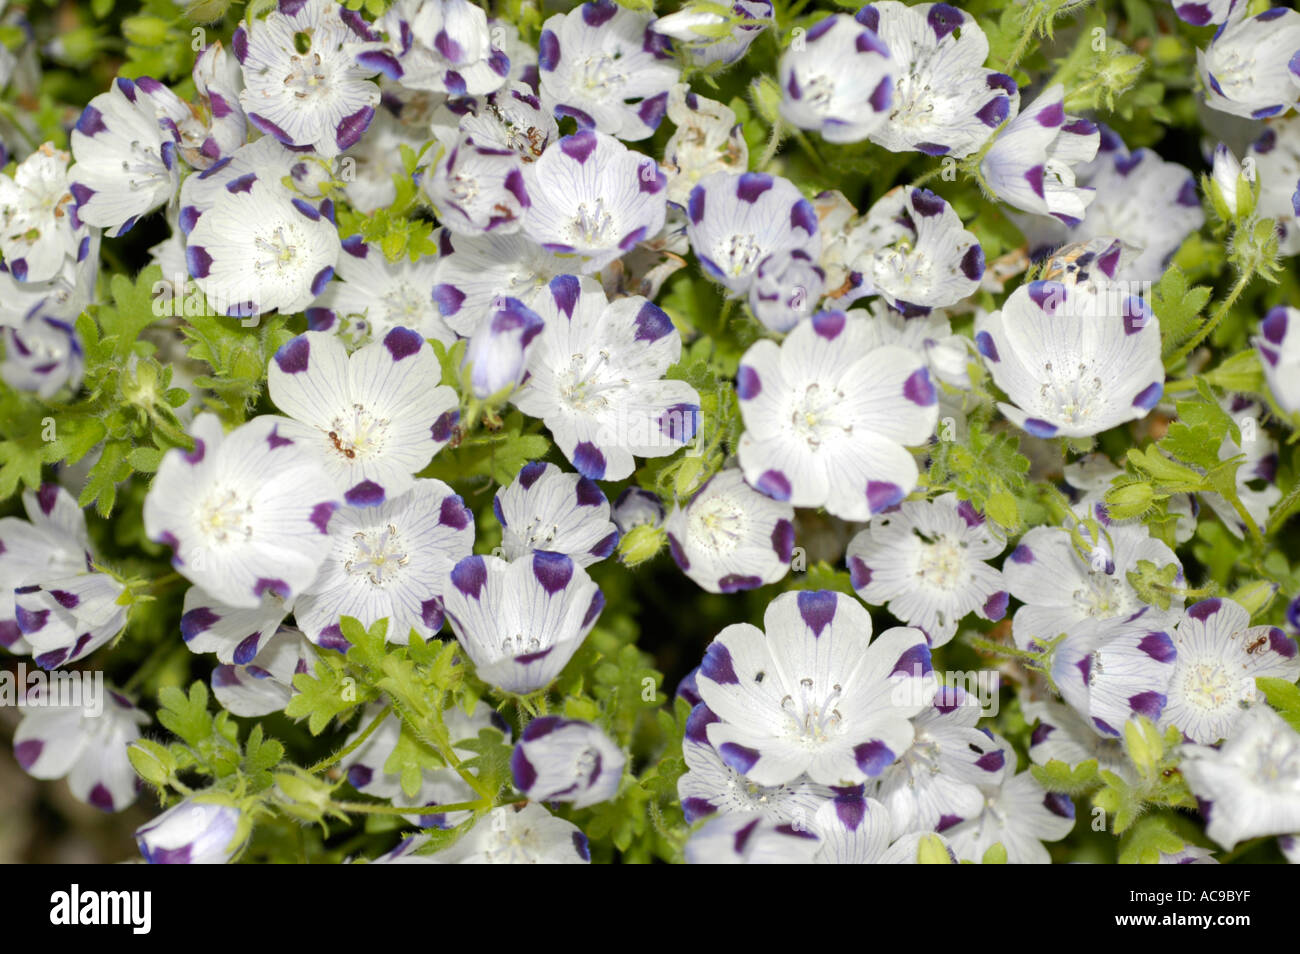 carpet of violet and white flowers of Hydrophyllaceae Nemophila maculata Benth Northern America Stock Photo